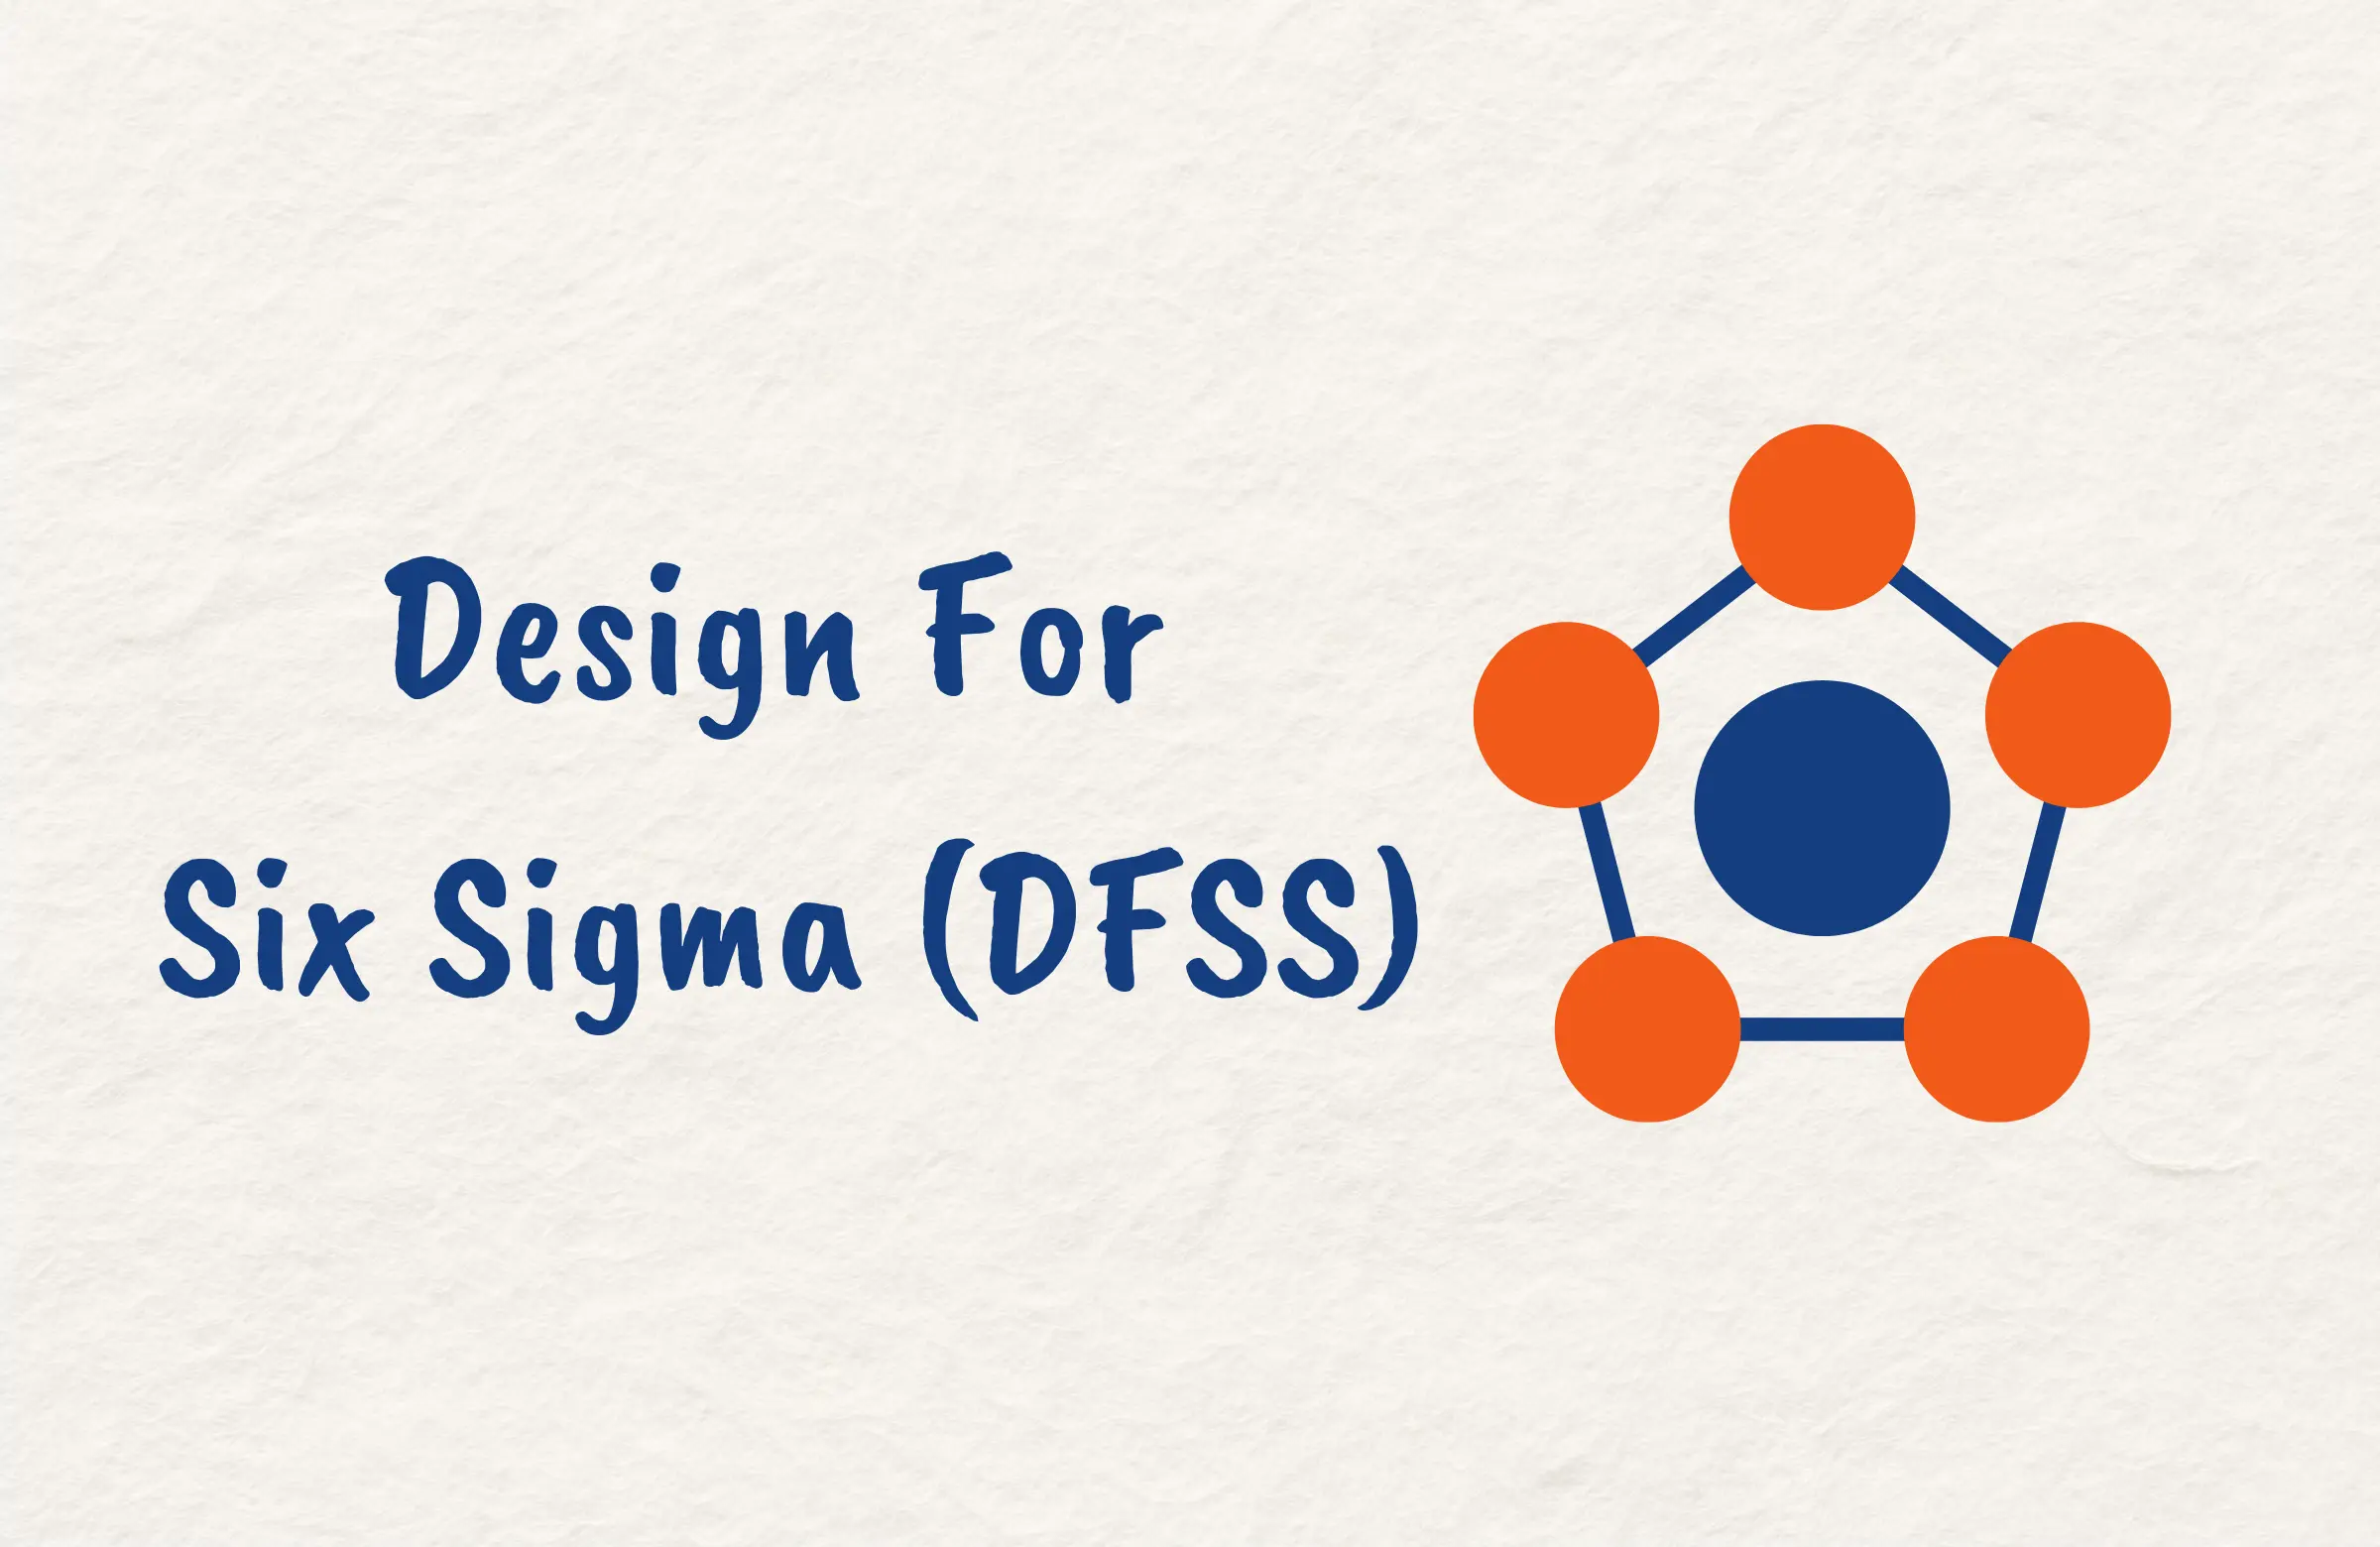 What is Design for Six Sigma (DFSS)